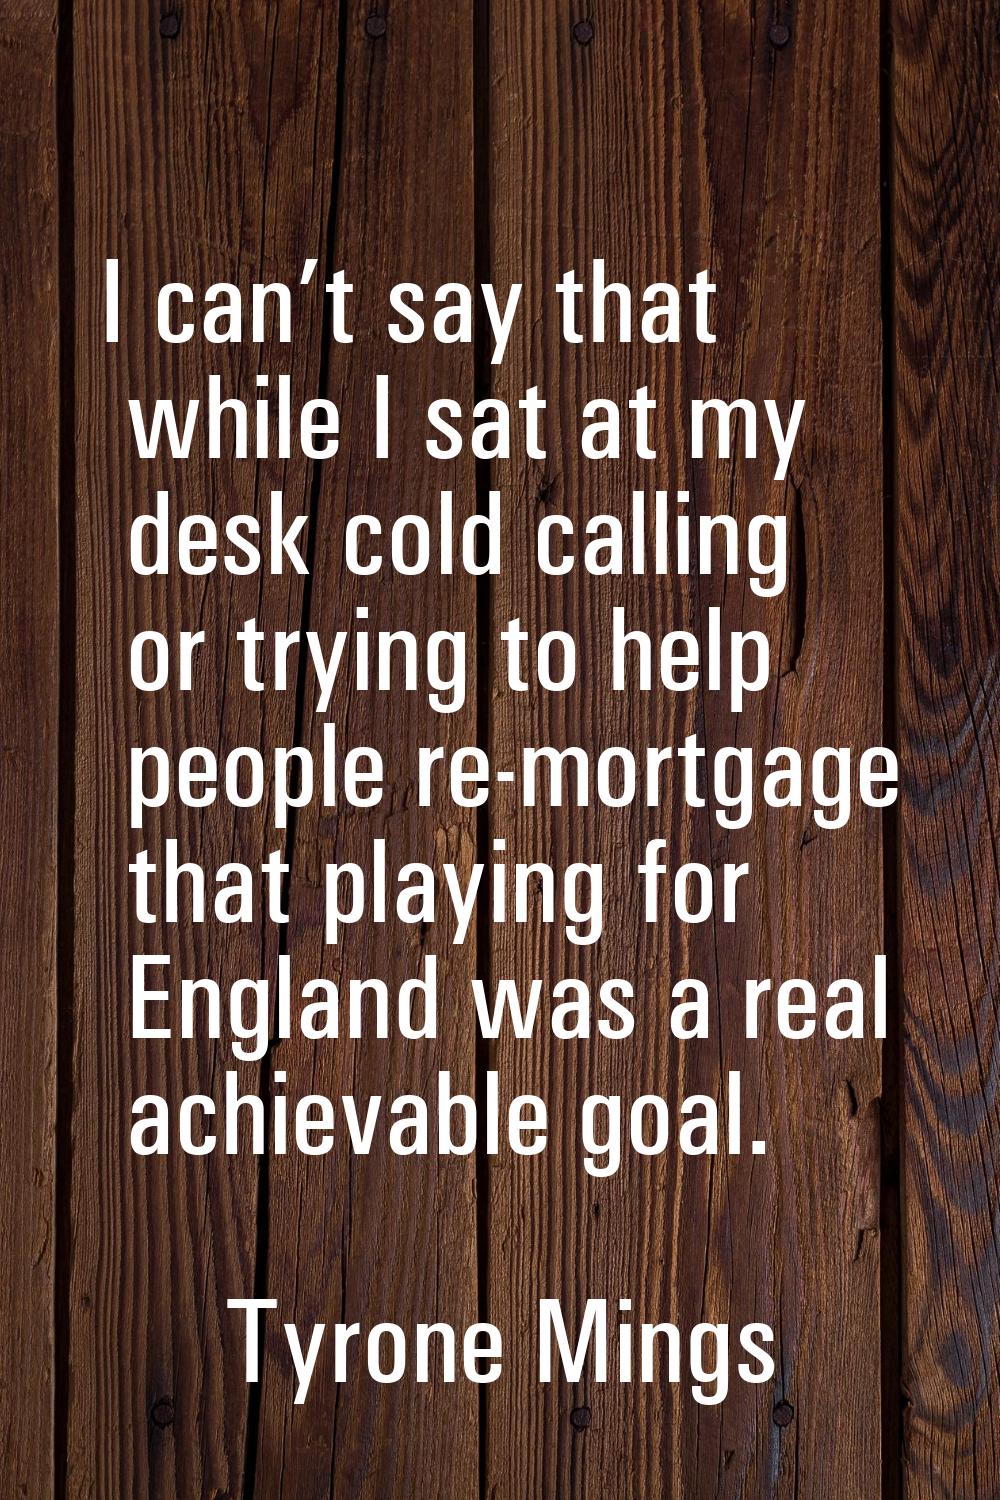 I can’t say that while I sat at my desk cold calling or trying to help people re-mortgage that play